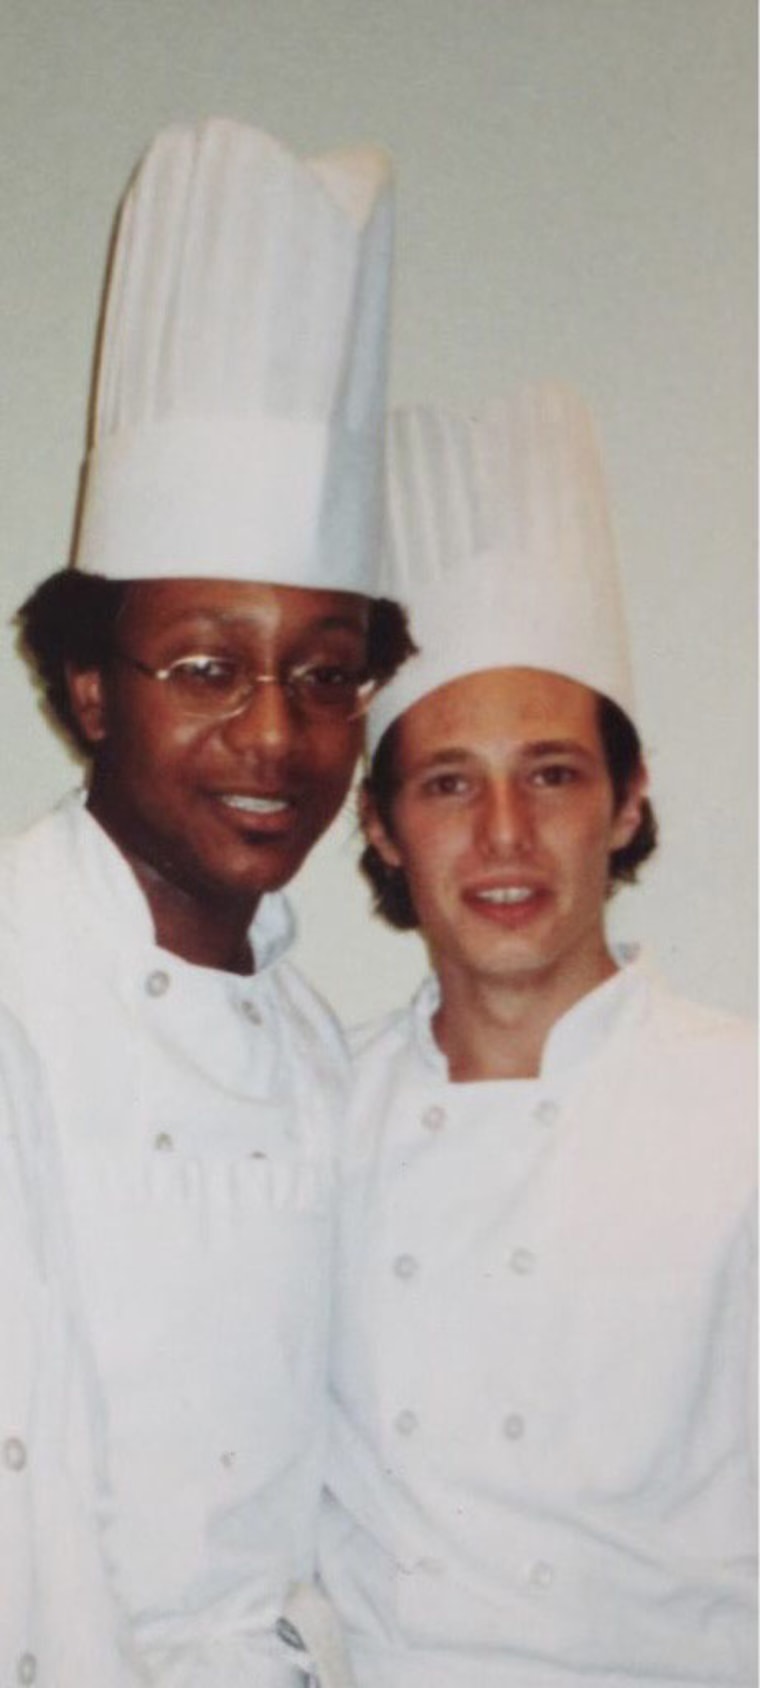 Gourdet and Mark Lapico, executive chef at Jean-Georges.